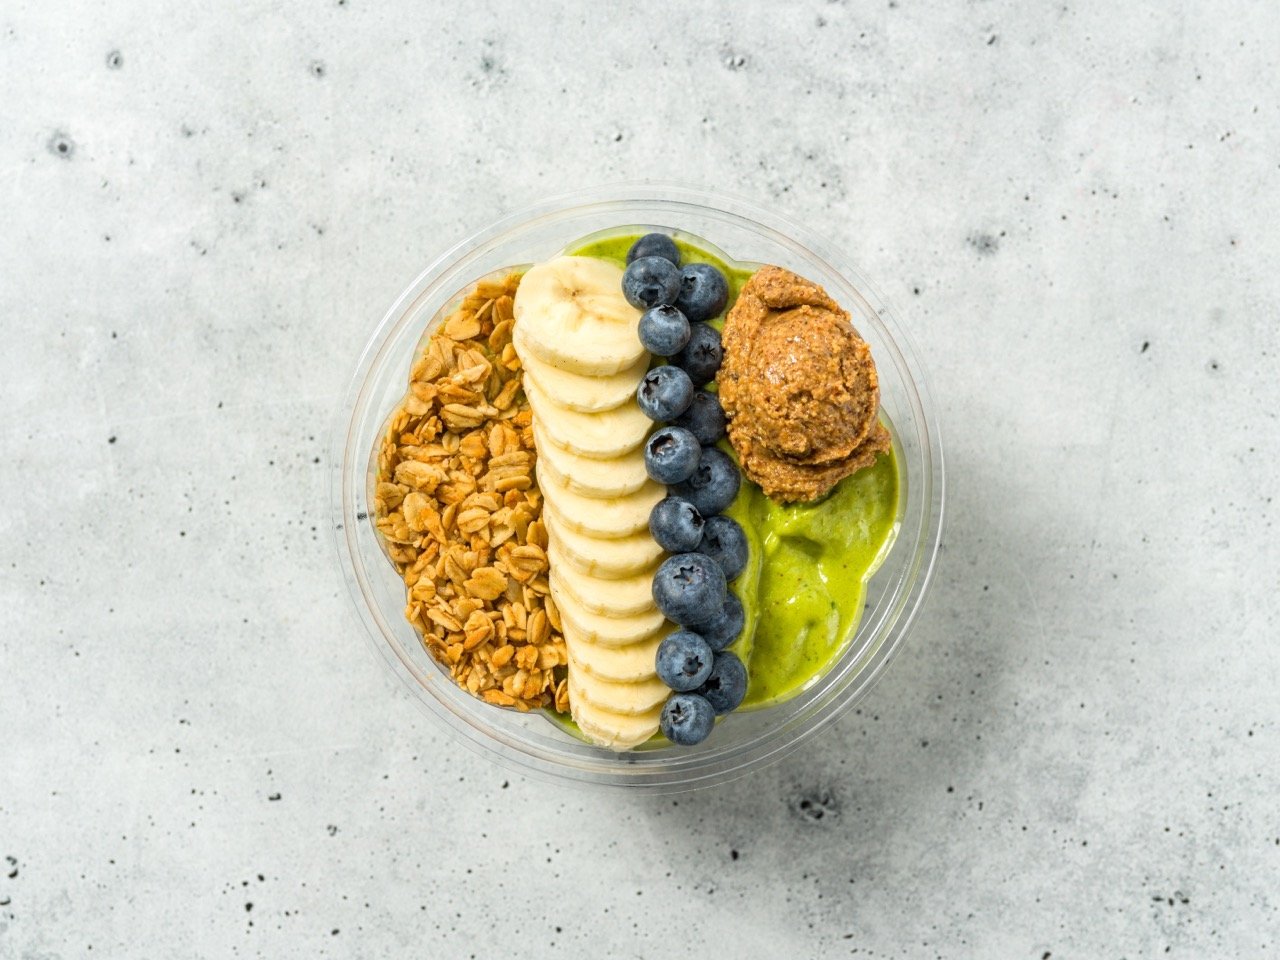  A scoop of peanut butter completes the arrangement on the smoothie bowl. 